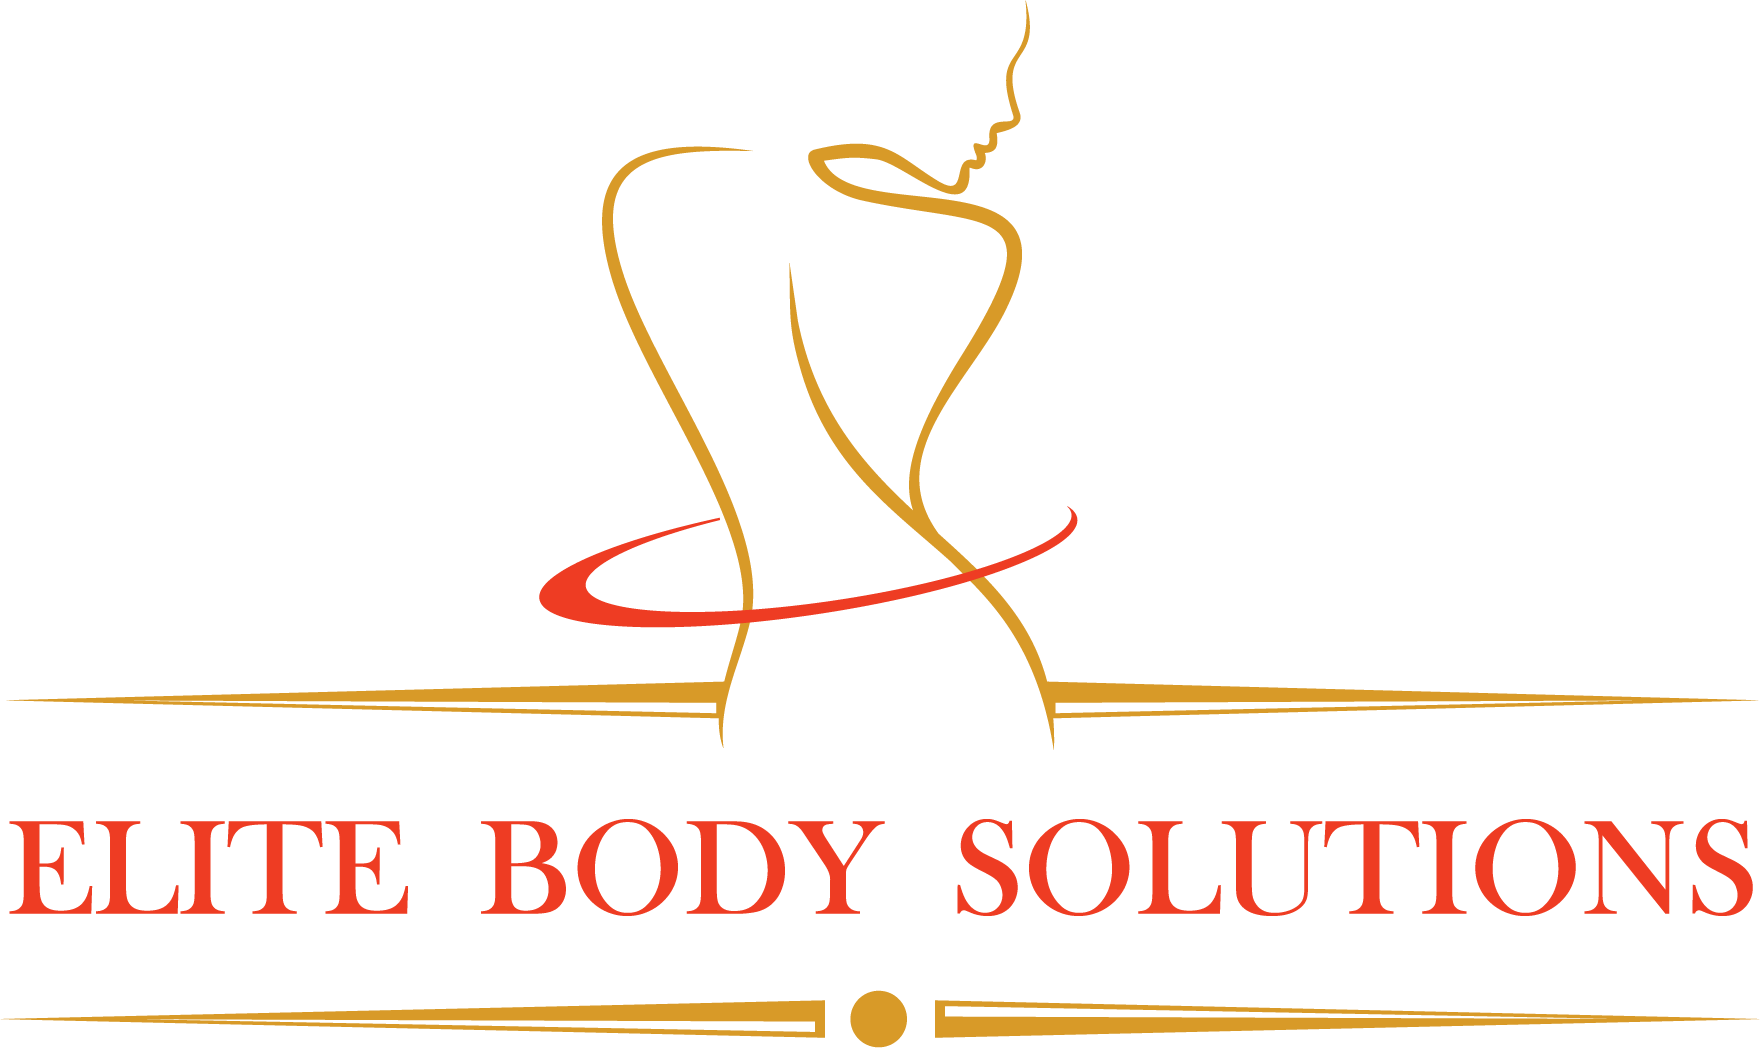 Body Solutions